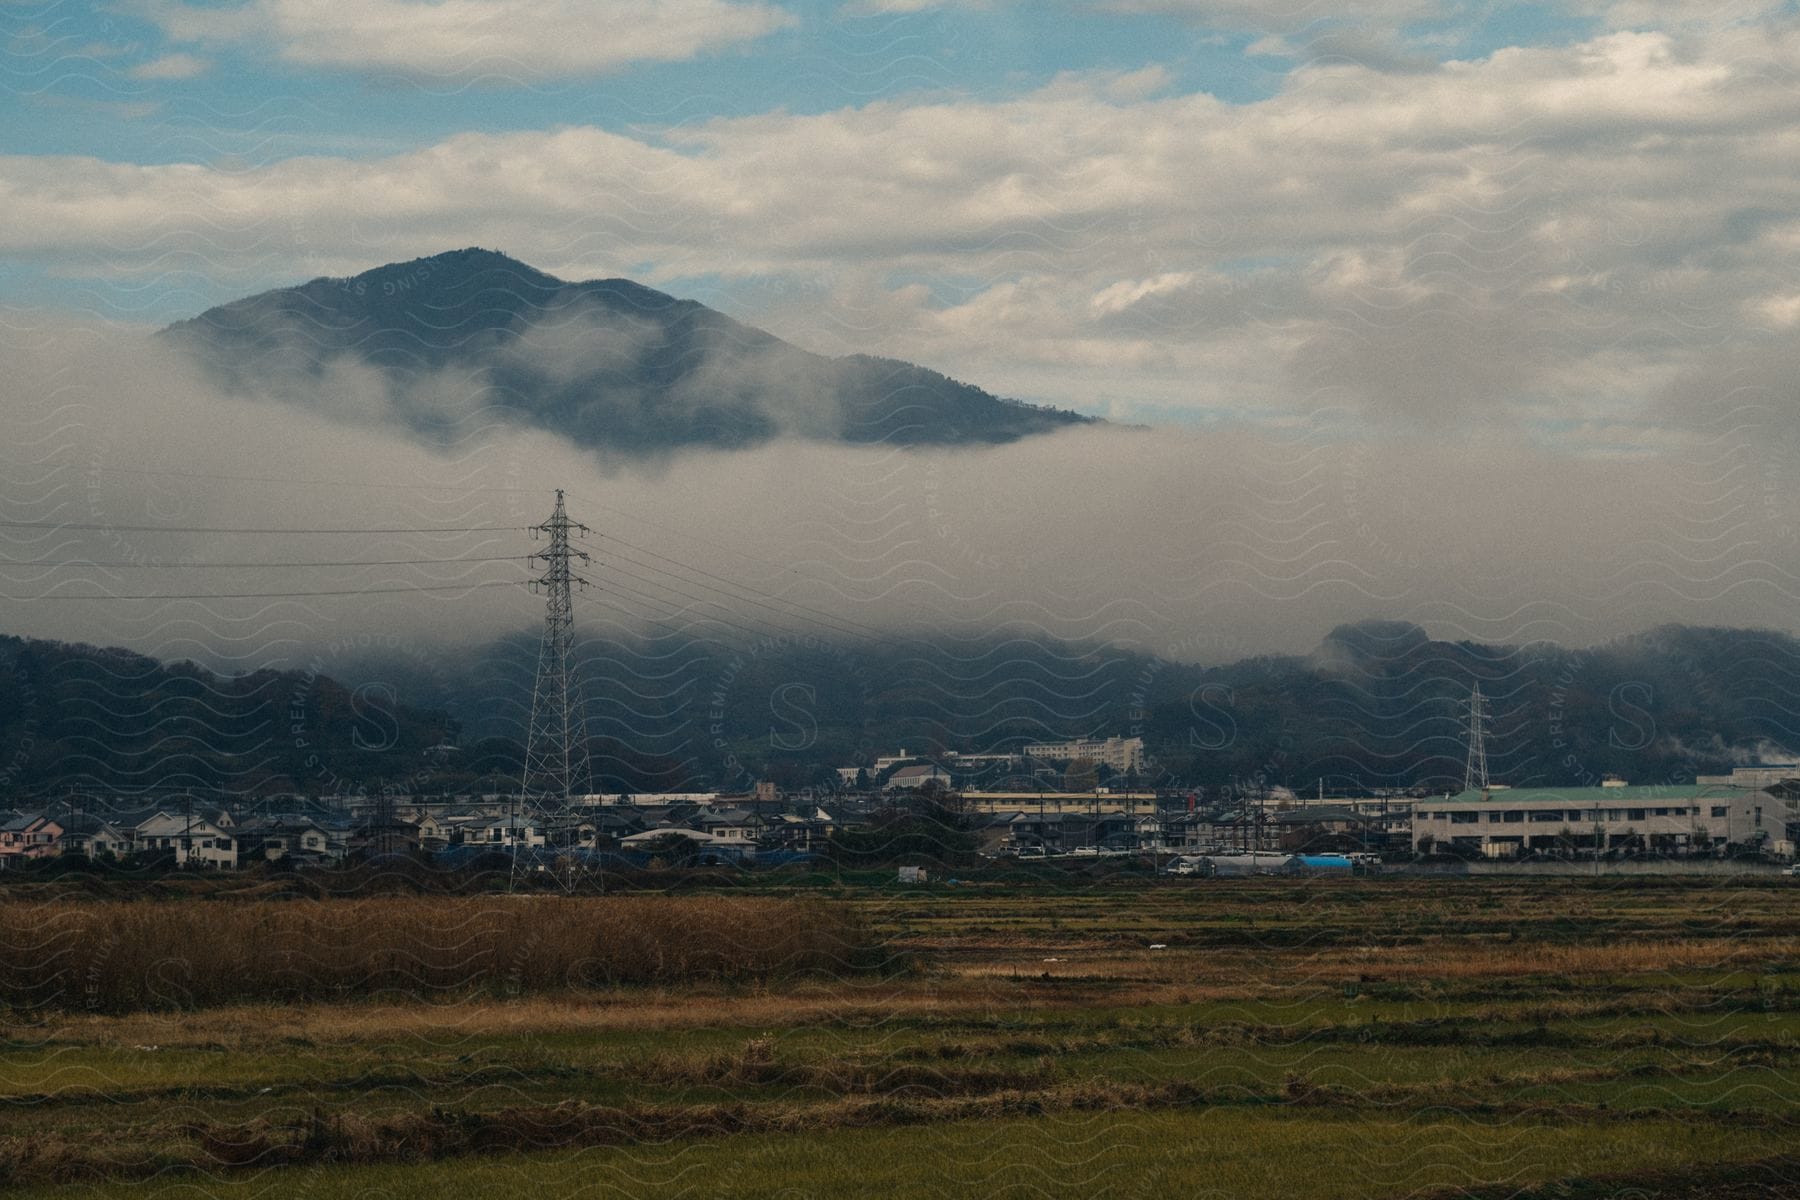 A mountain landscape with fog and power lines